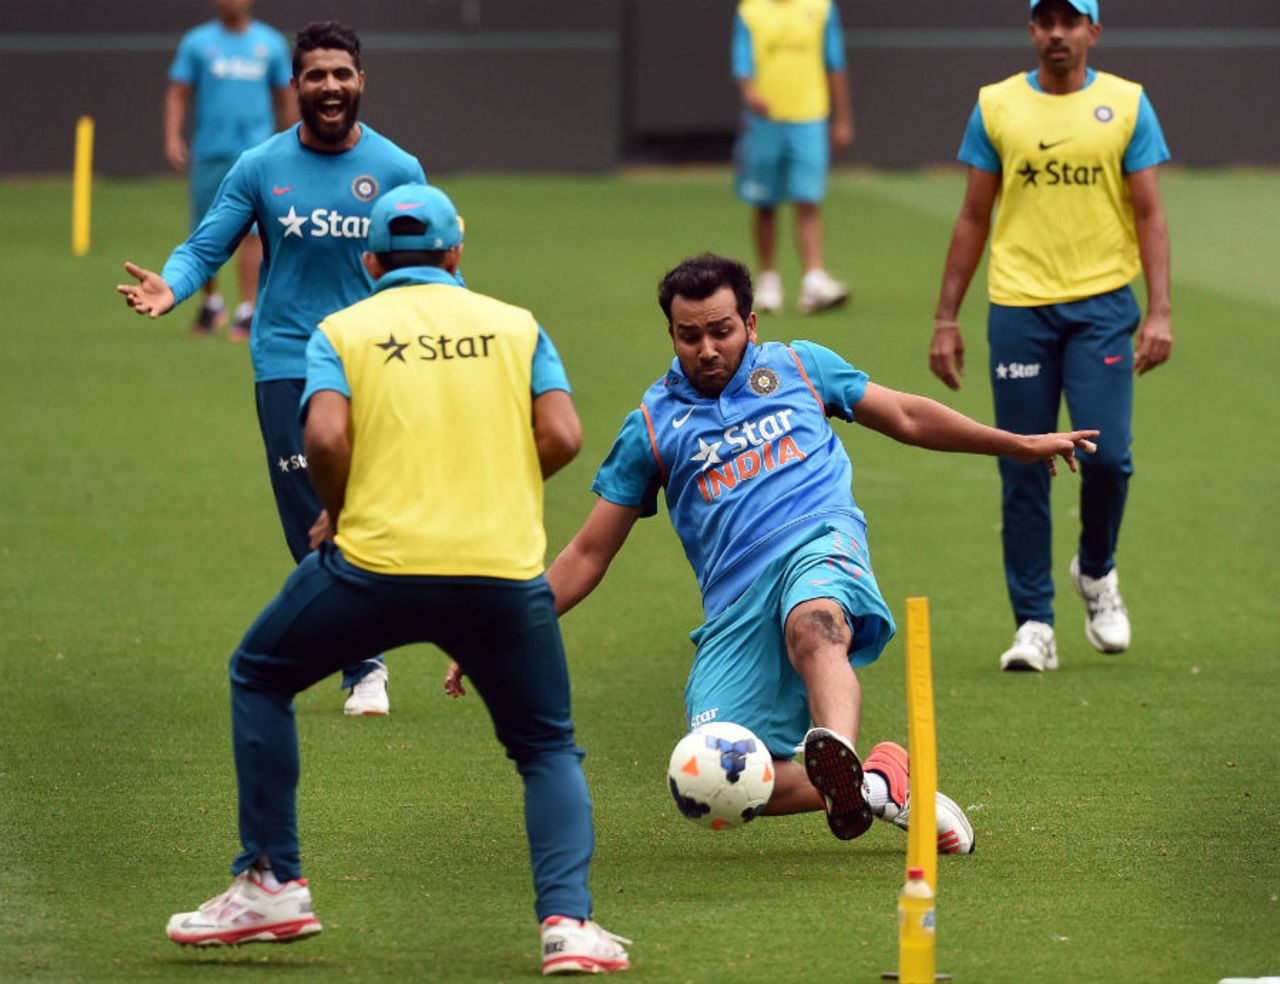 Rohit Sharma stretches to reach the ball during a game of football, World Cup 2015, Melbourne, March 17, 2015